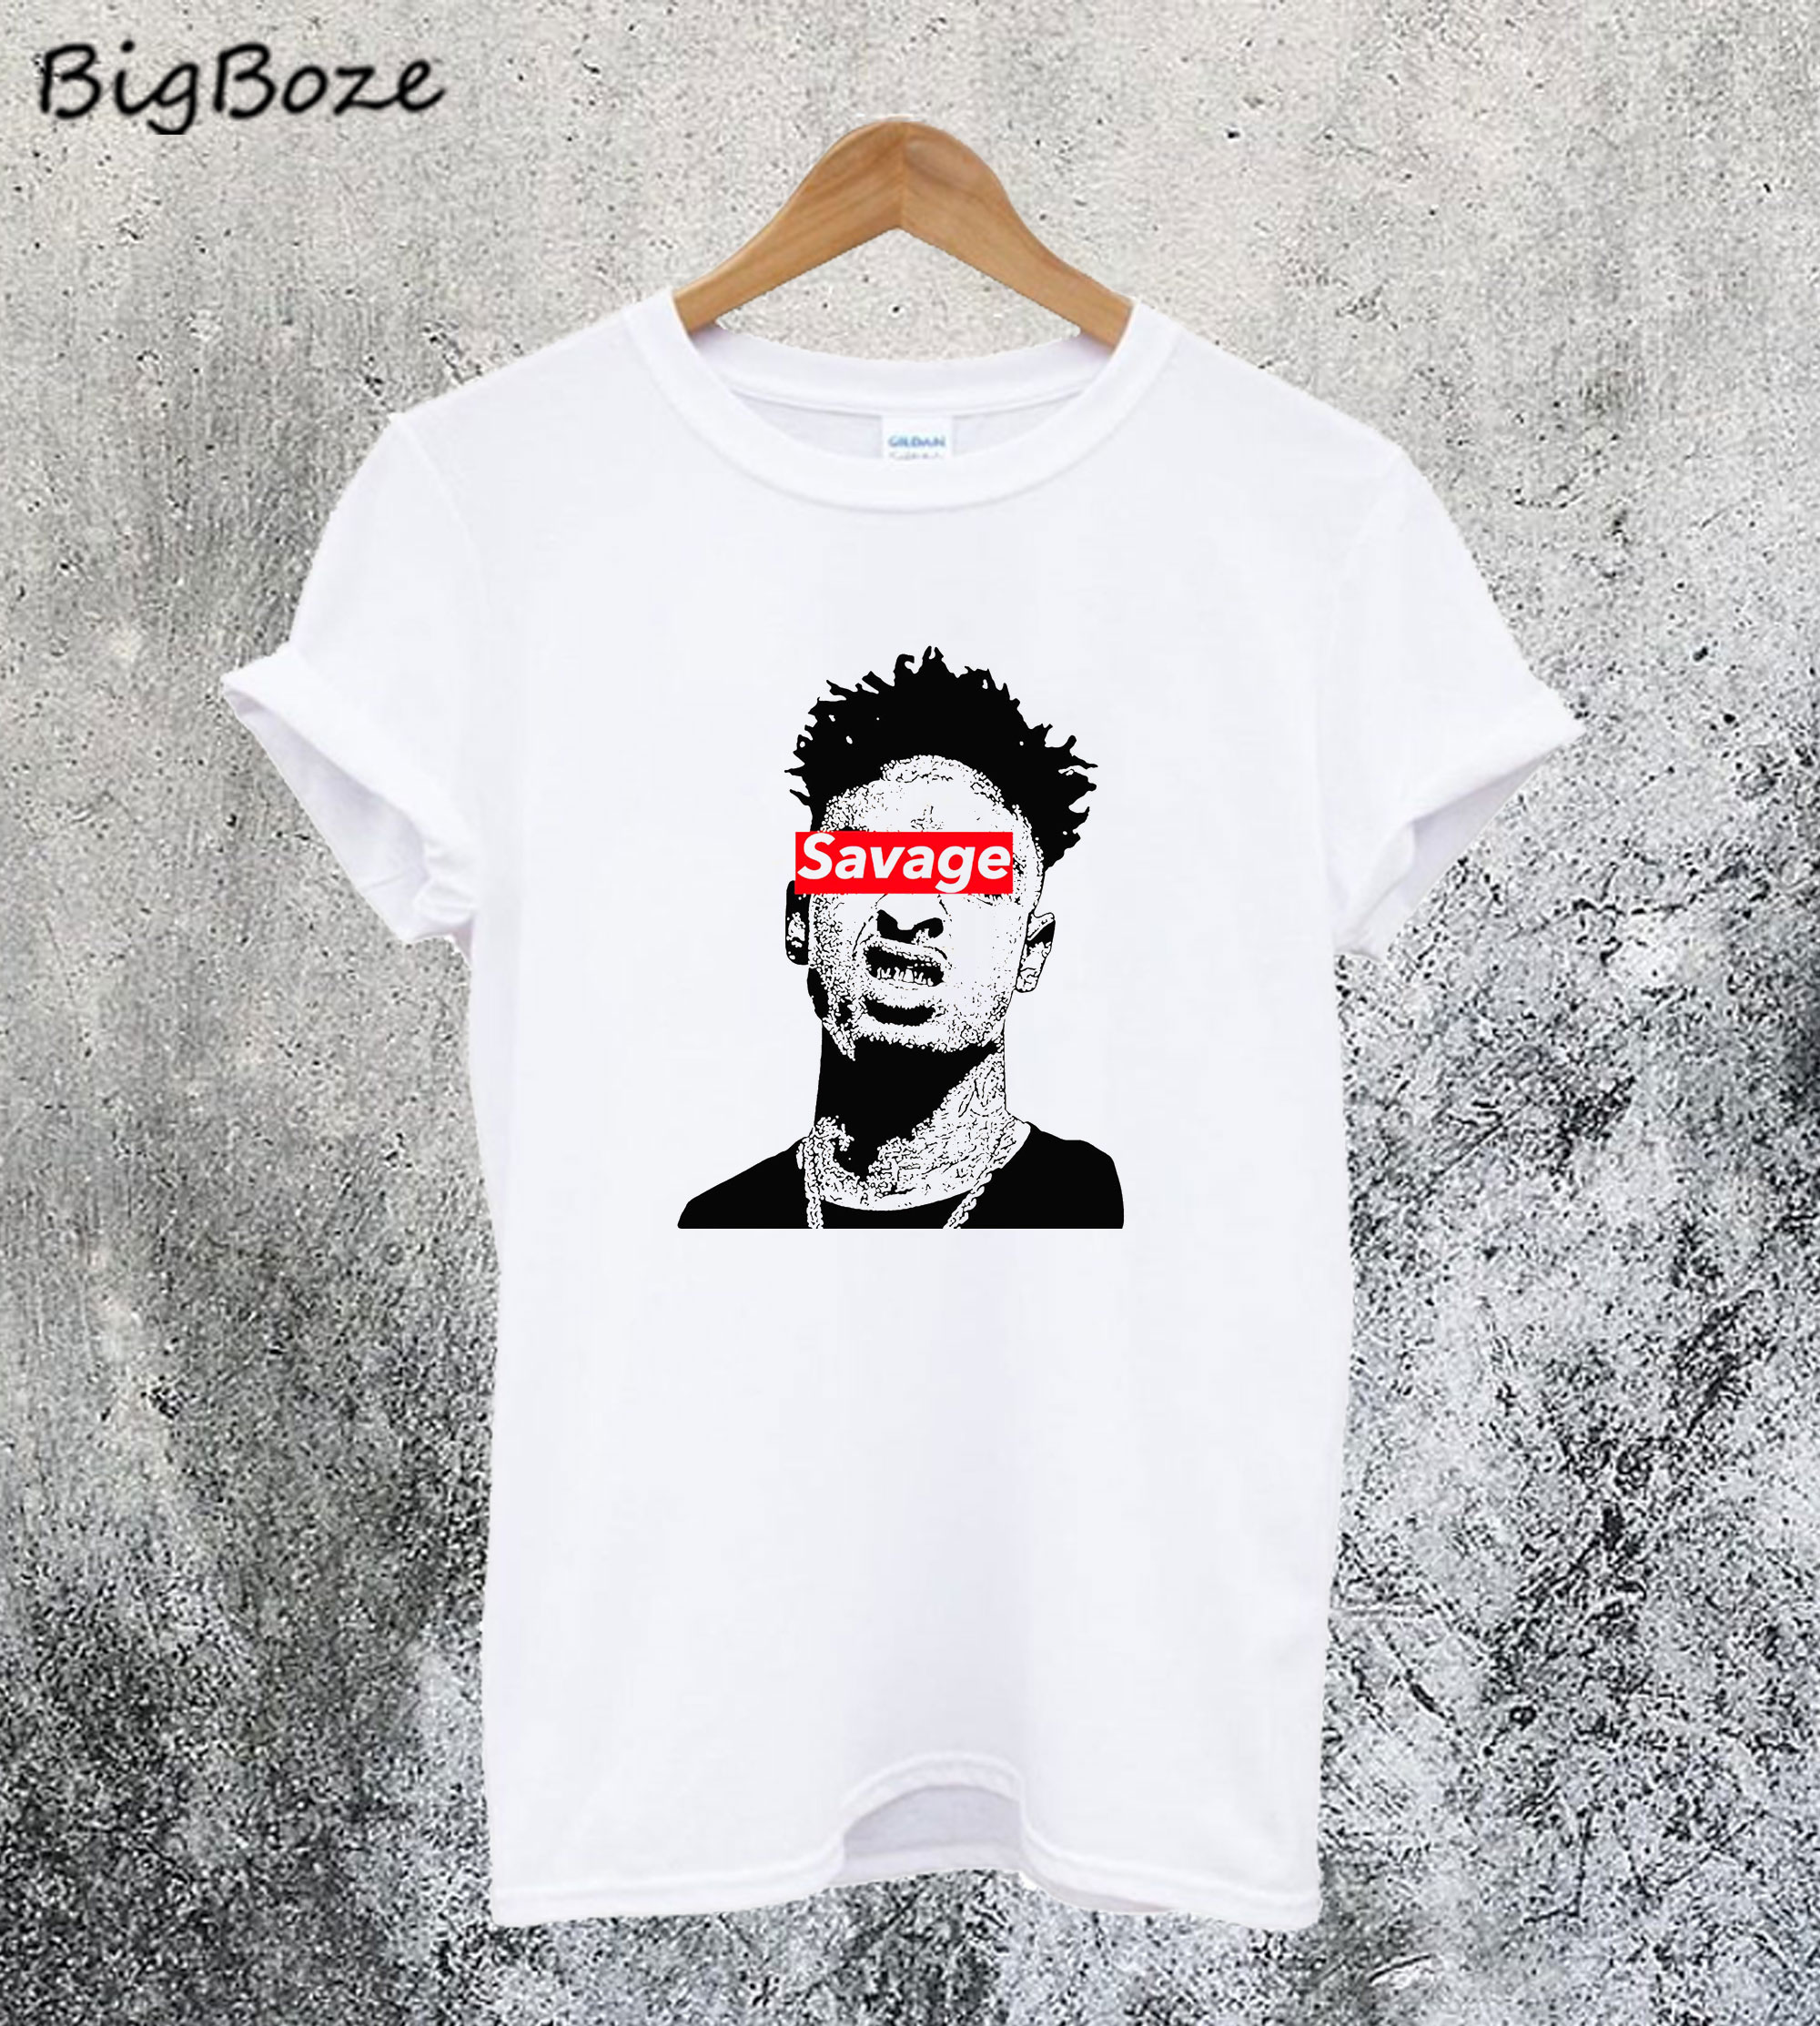 21 savage T-shirt Cotton For men Women All Size S To 4XL NP1934